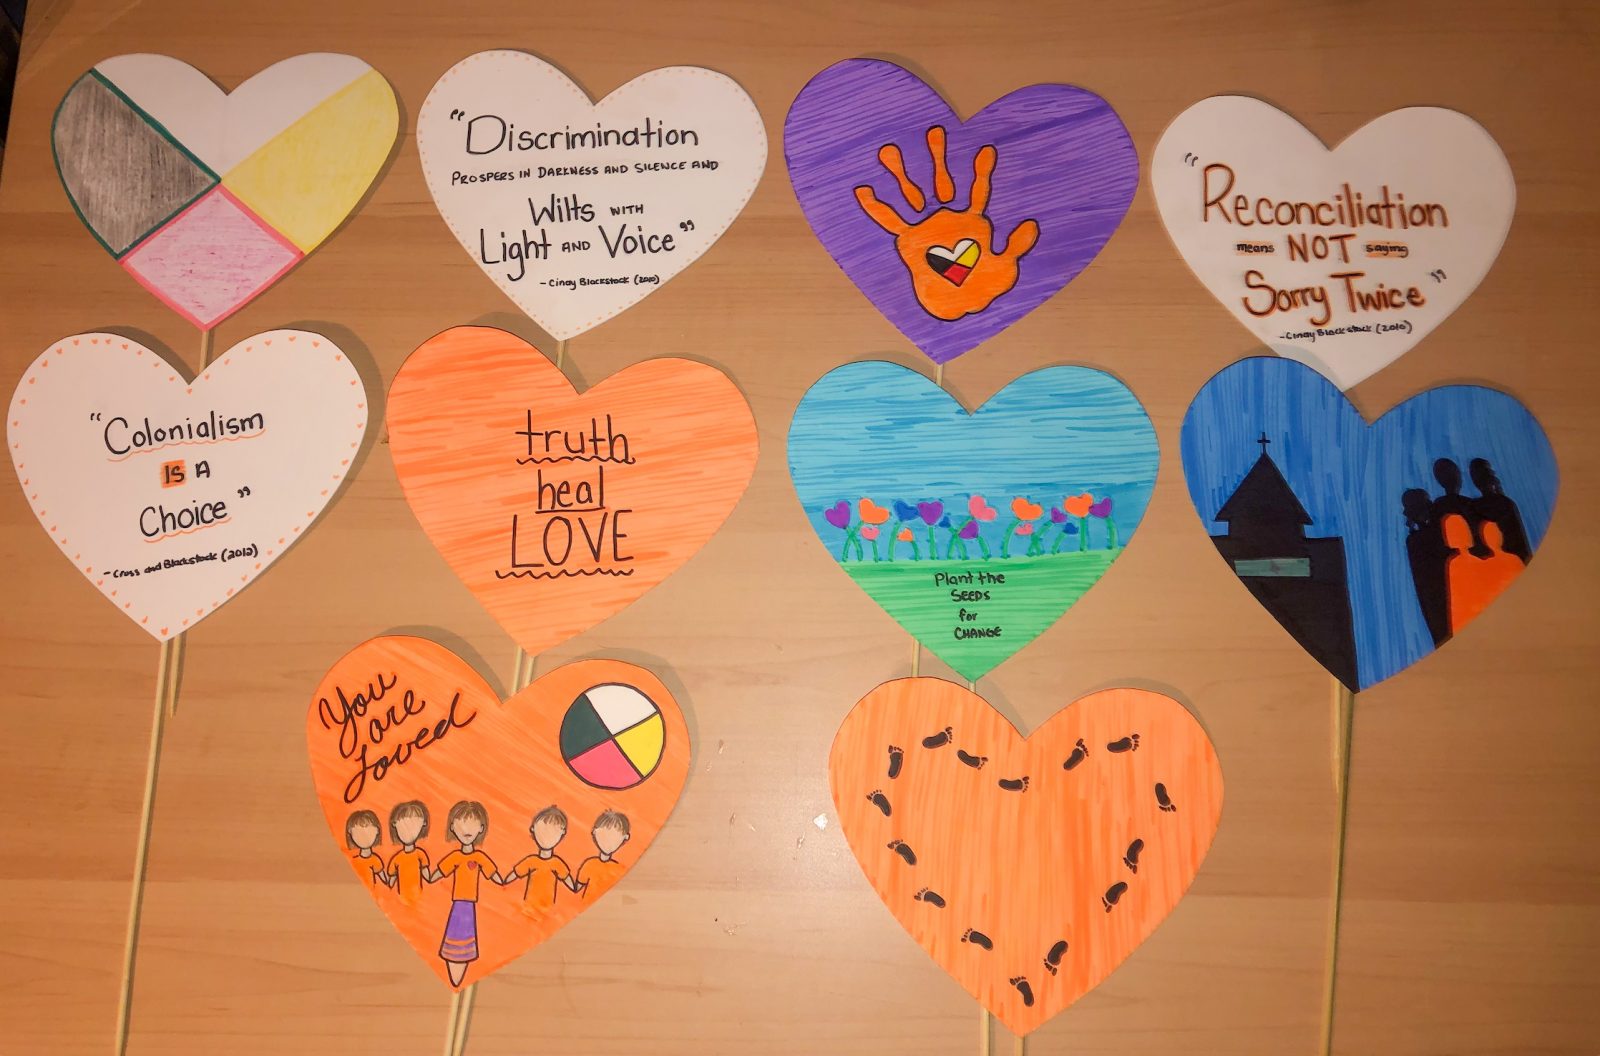 Paper hearts attached to small sticks feature quotes and images about reconciliation and decolonization.